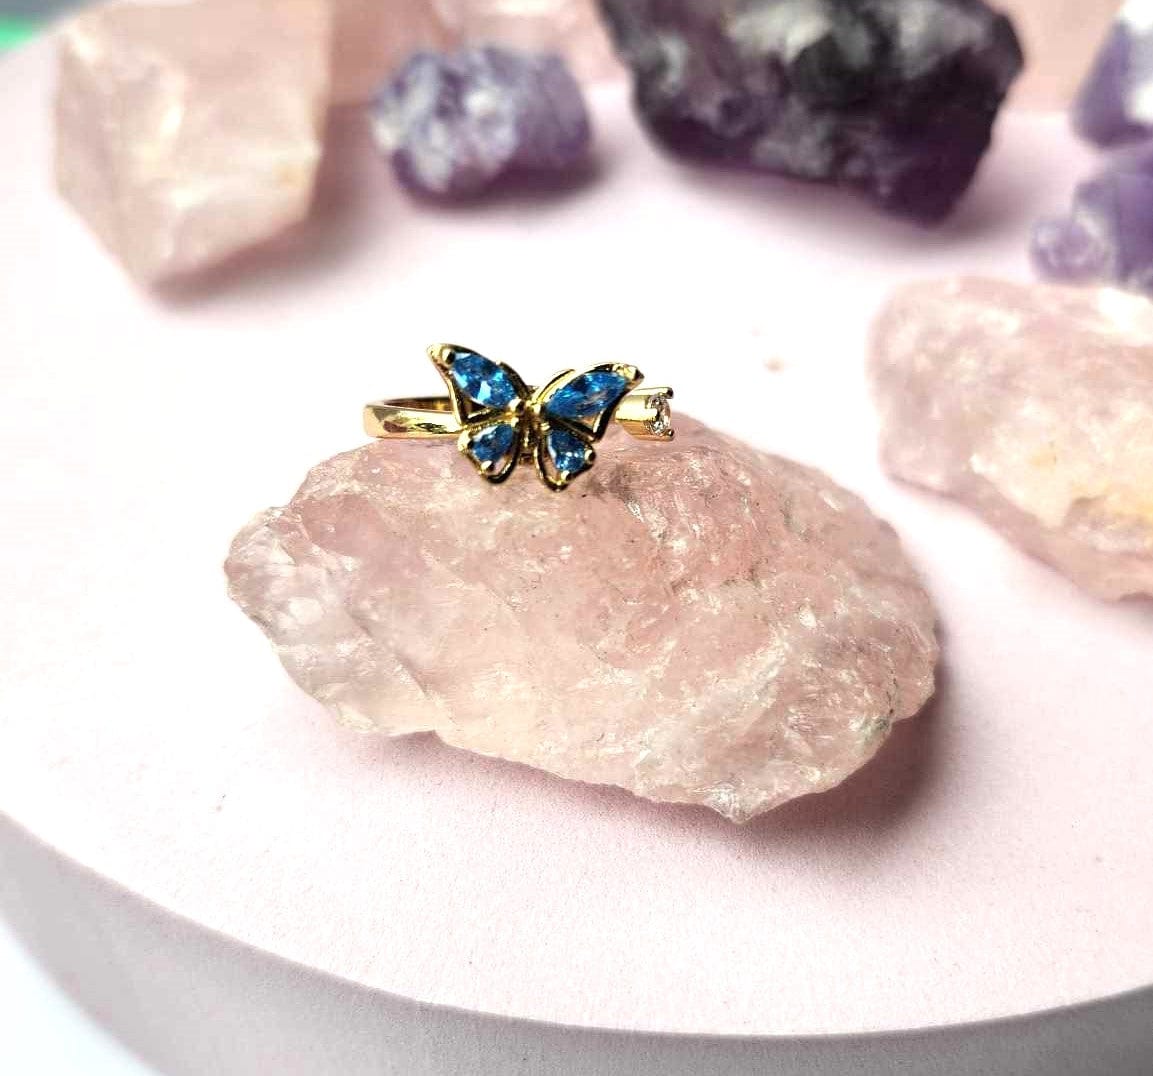 The Wellbeing Collection - Gold Plated Blue Butterfly Fidget Spinner Ring